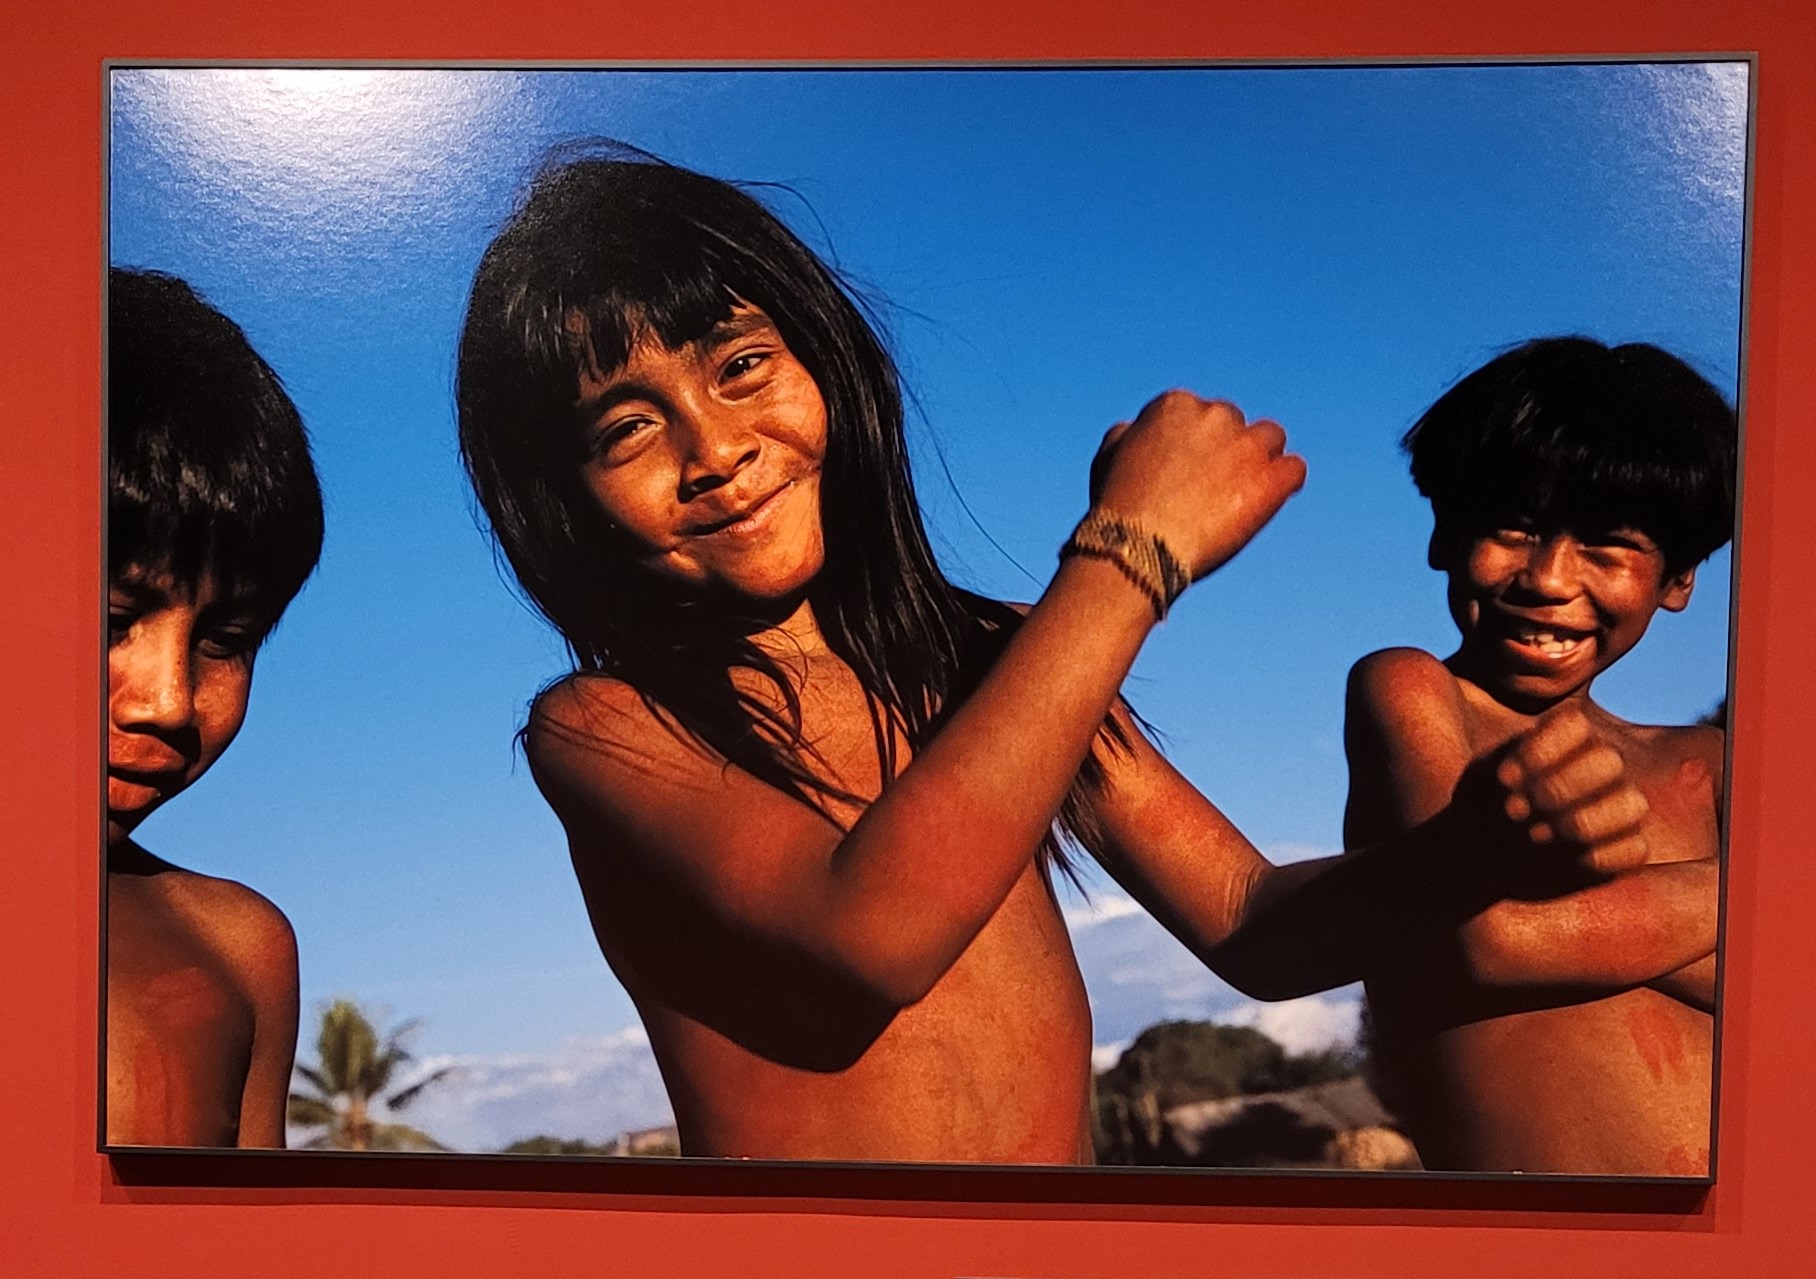 Photographic exhibition reveals the daily lives of indigenous peoples